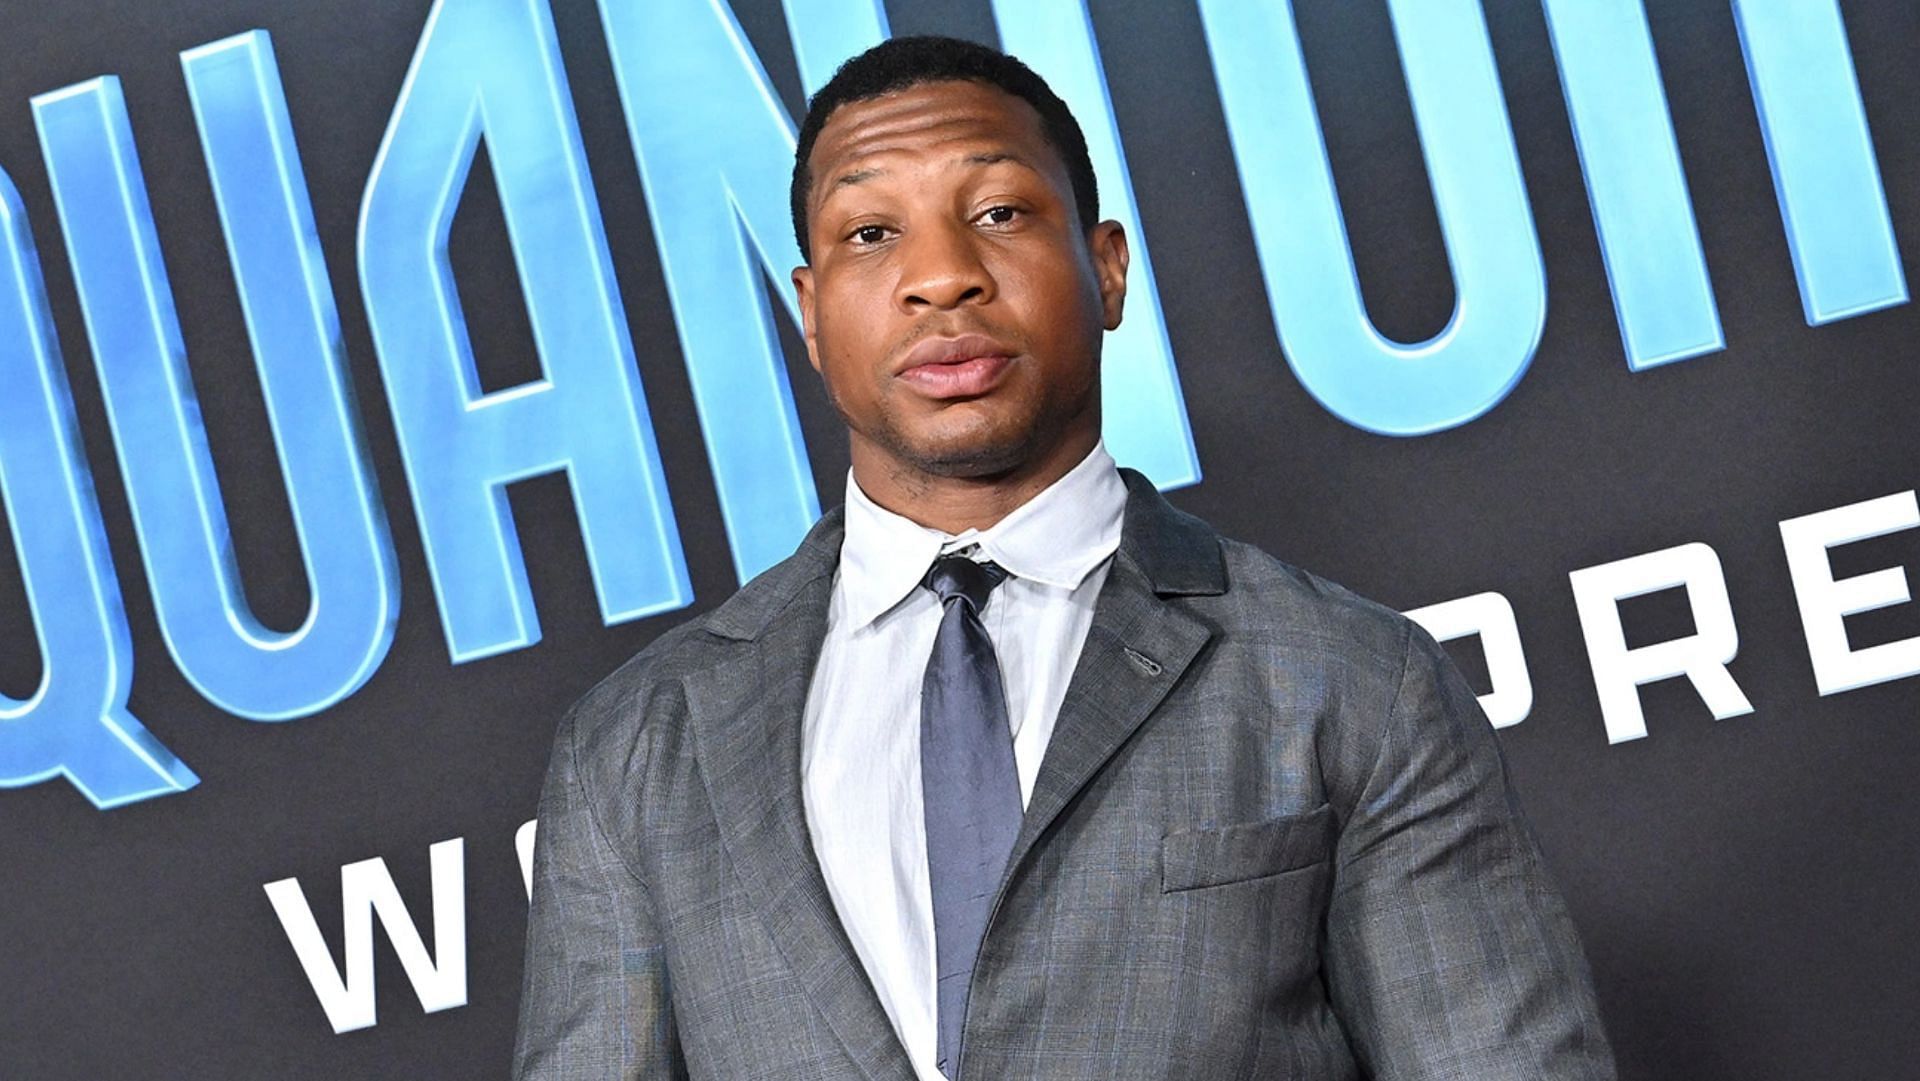 Jonathan Majors. (Image via Axelle/Bauer-Griffin/Getty)